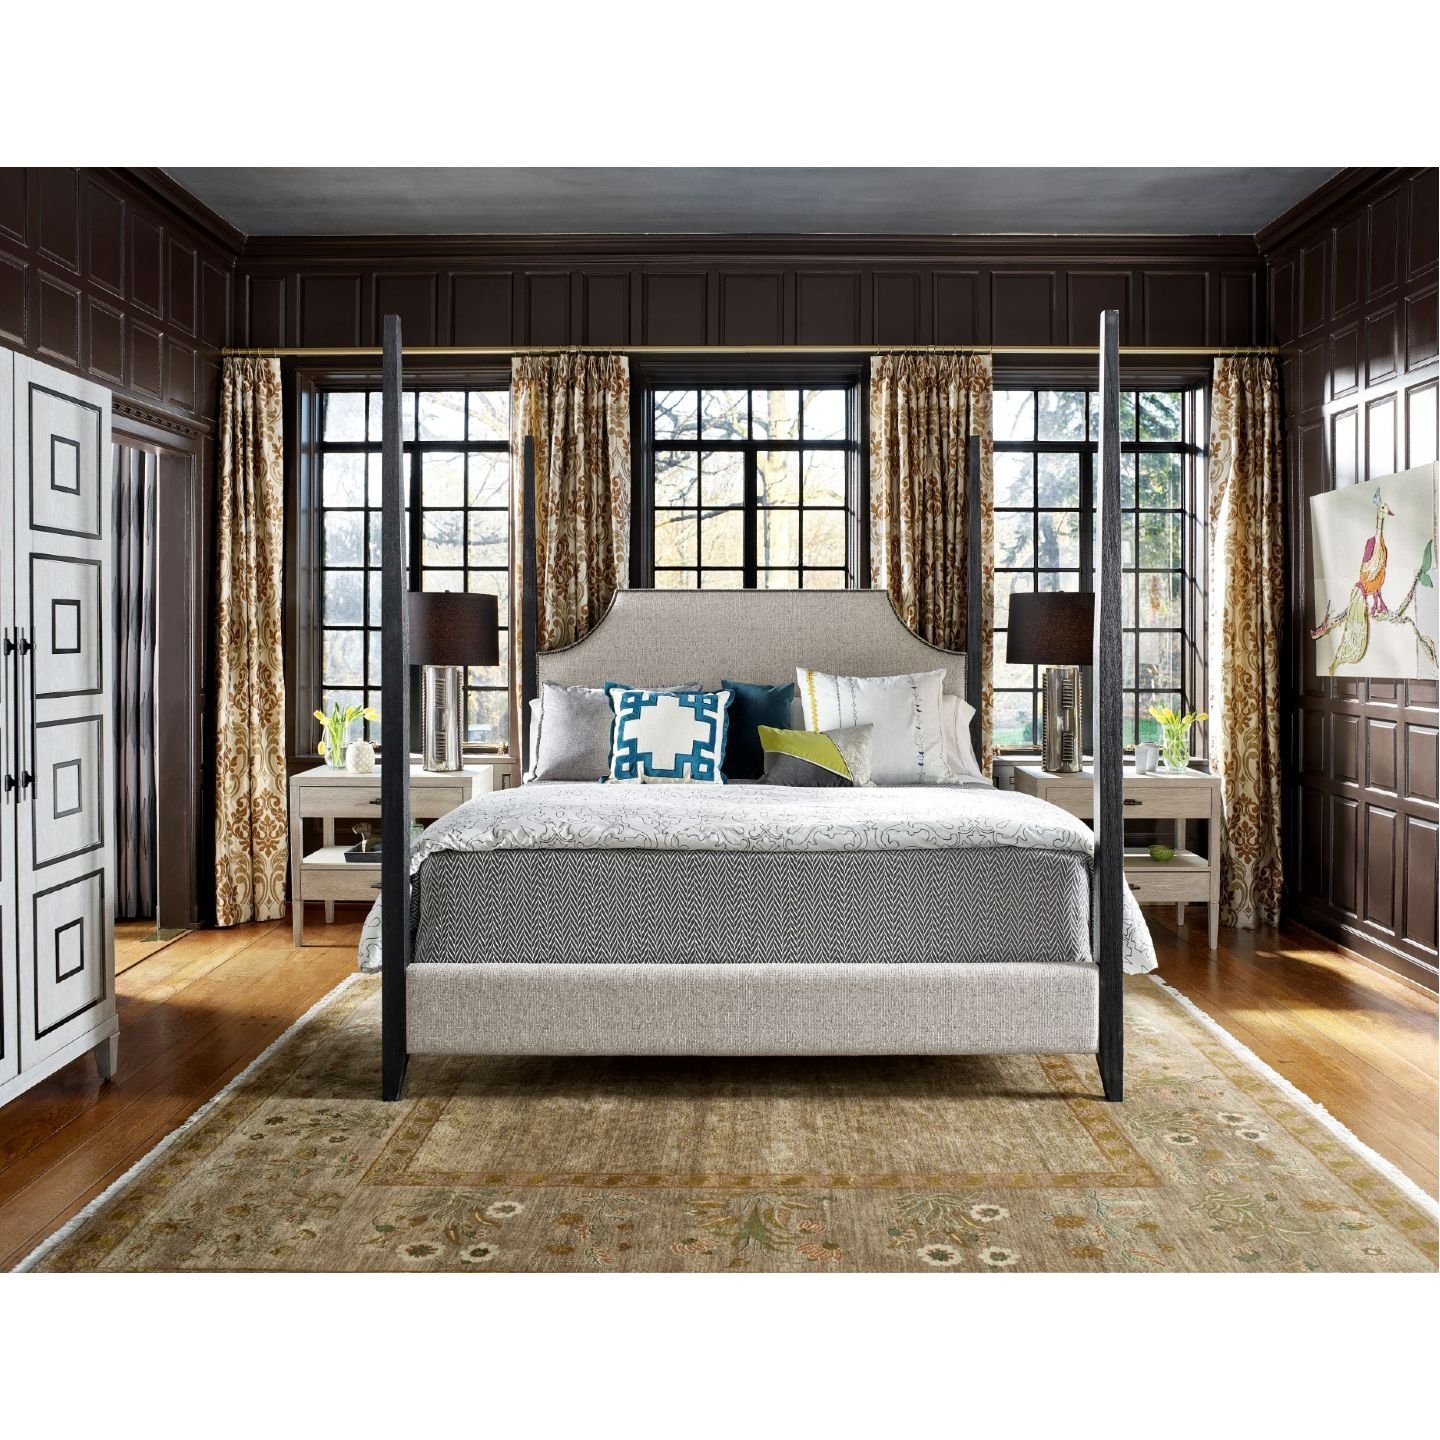 Mason Modern Classic Beige Upholstered Nailhead Trim Poster Bed - King - Image 2